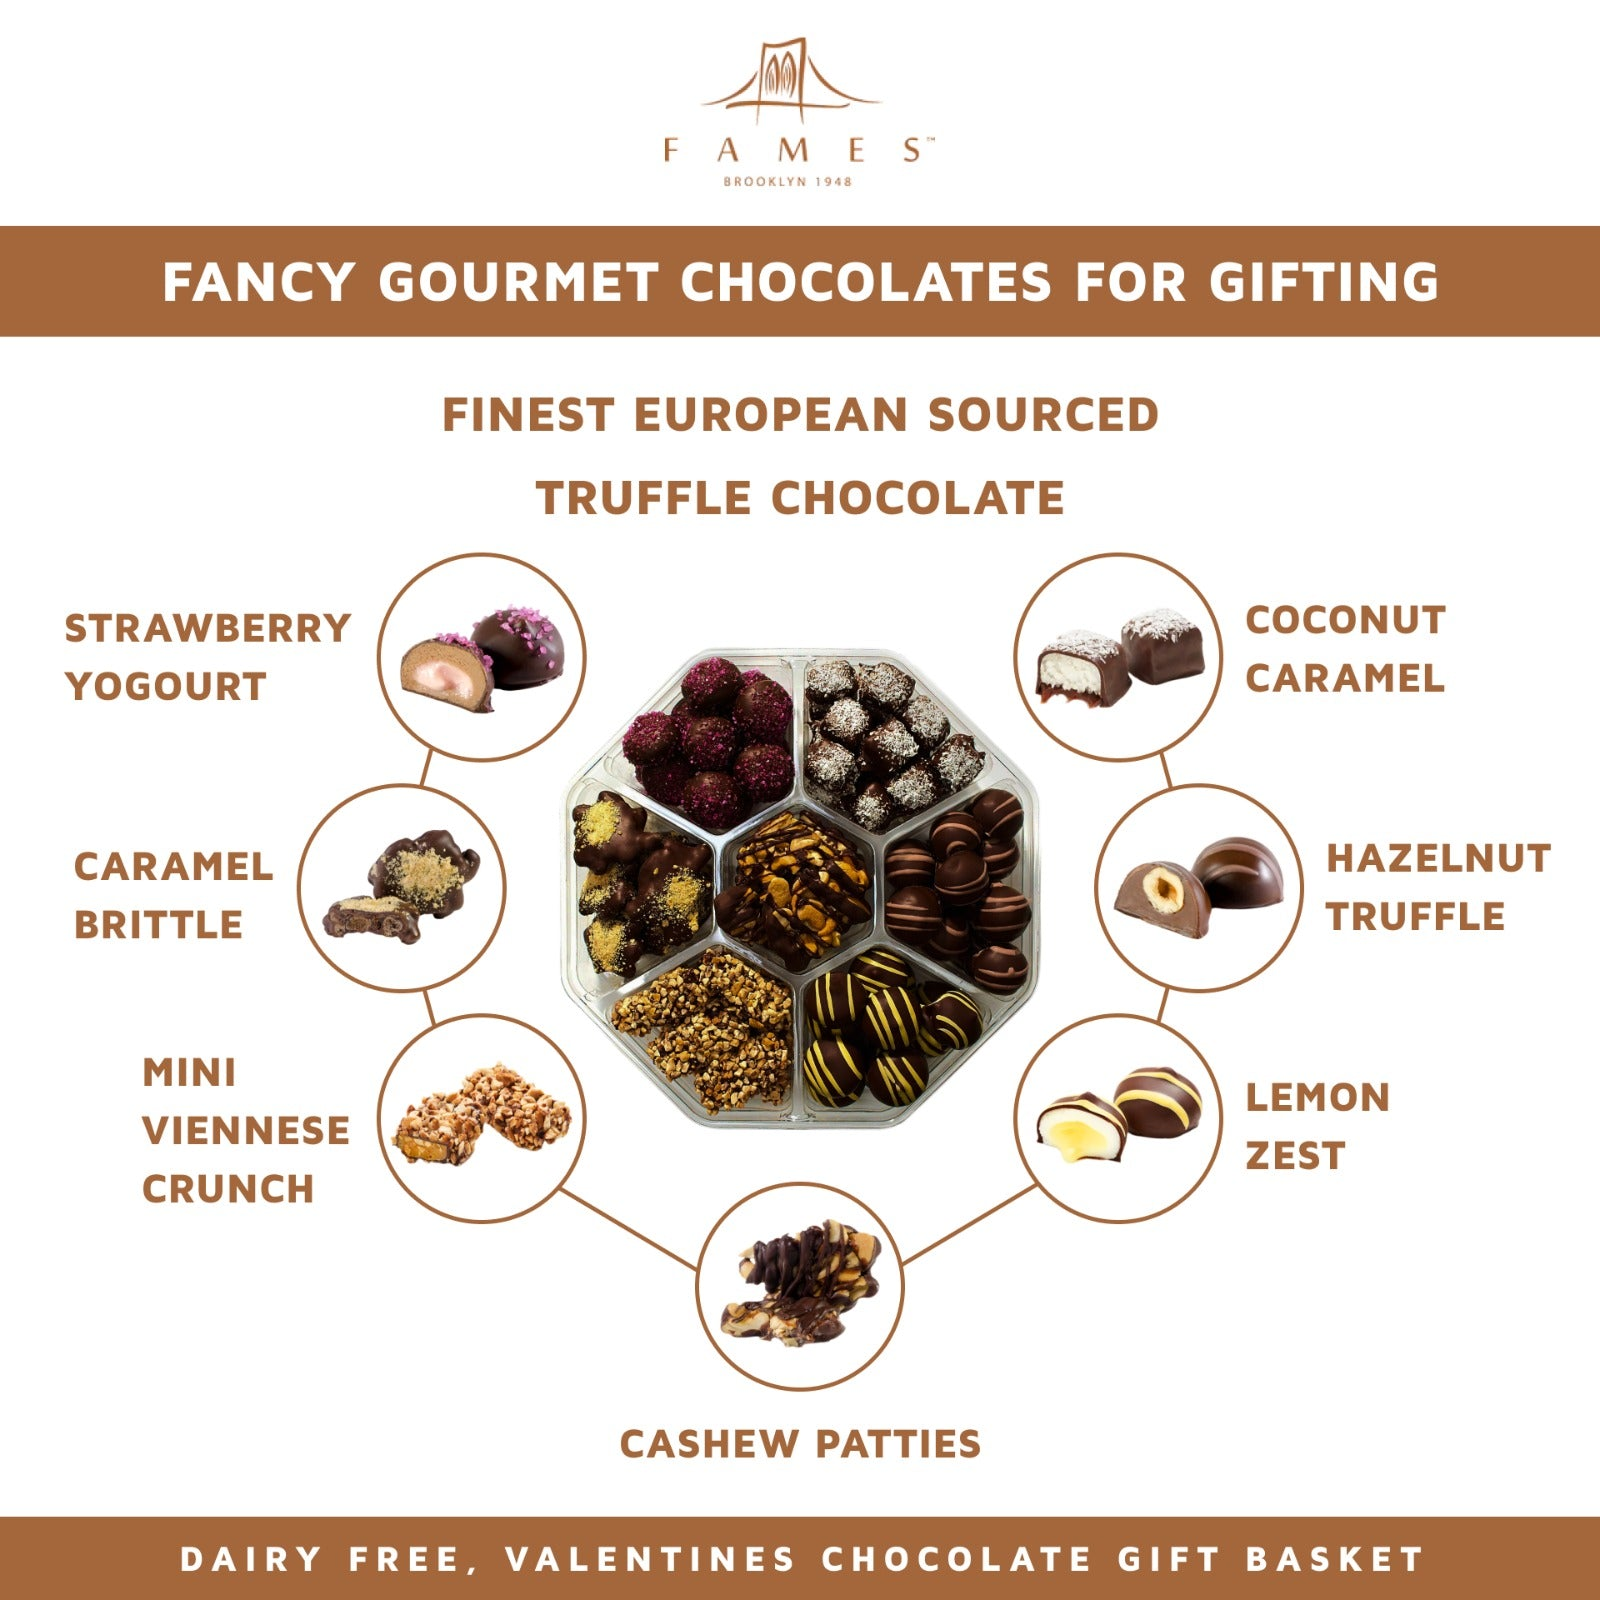 Assorted gourmet chocolates for gifting, labeled with flavor names.